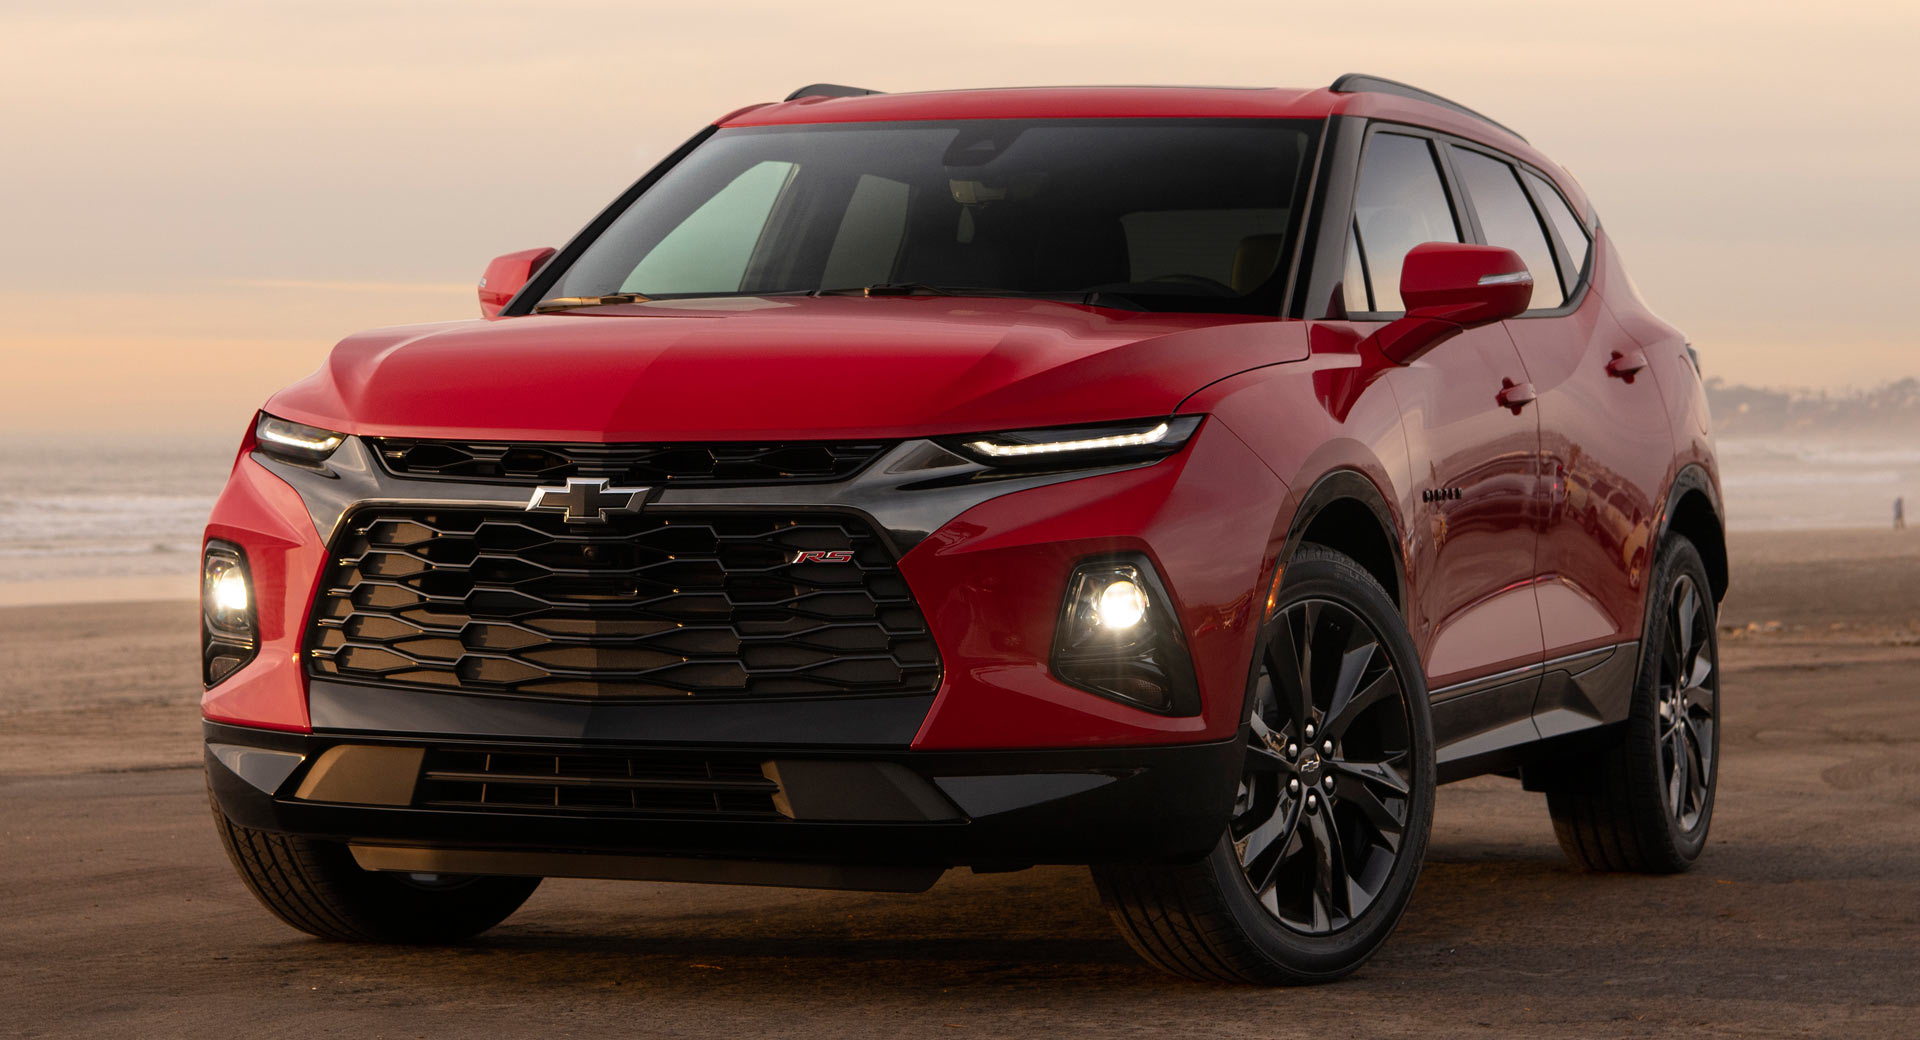 2020 Chevy Blazer Going Turbo With New FourCylinder Option Carscoops